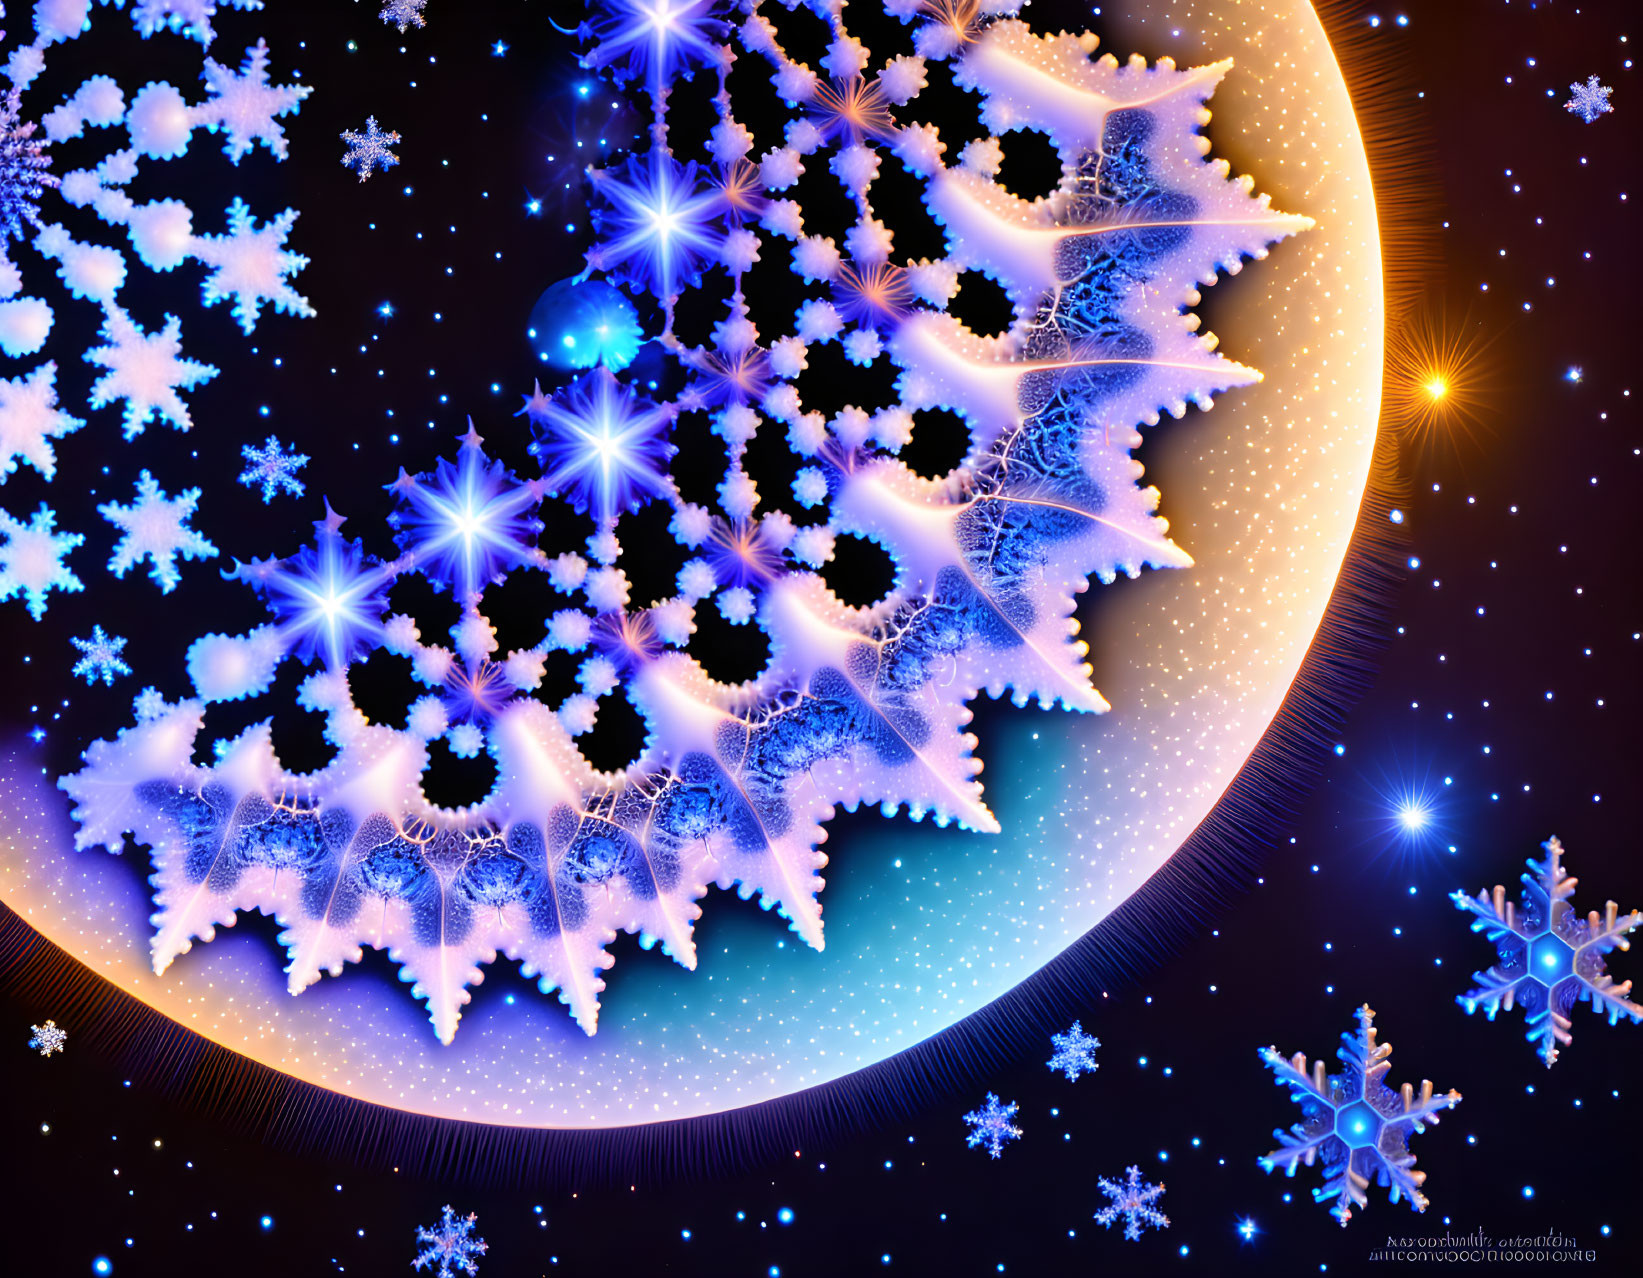 Intricate fractal snowflakes against cosmic blues and purples